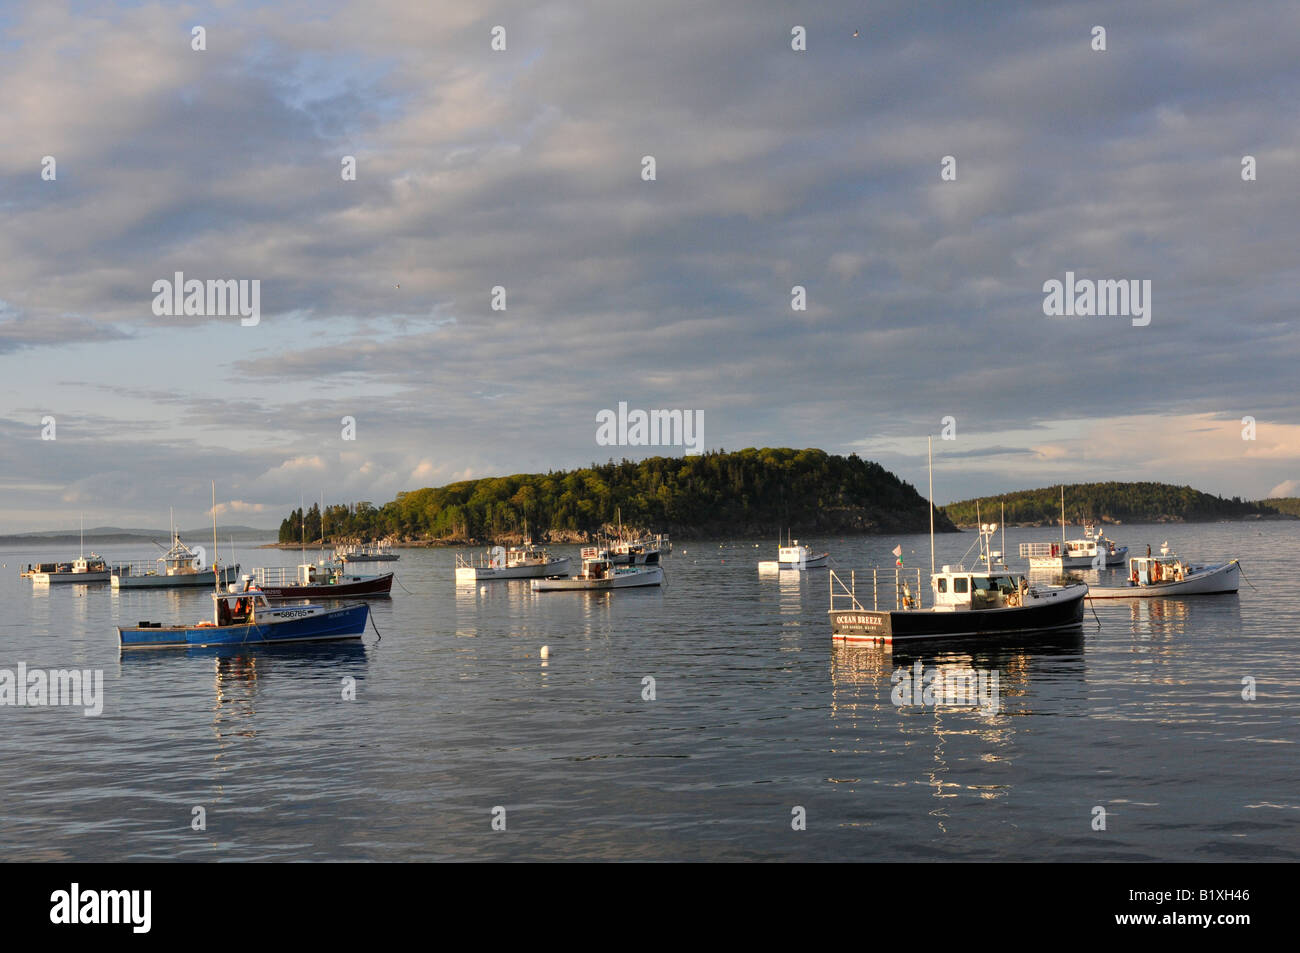 Boats in the Bar Harbor harbor, Maine, United States Stock Photo